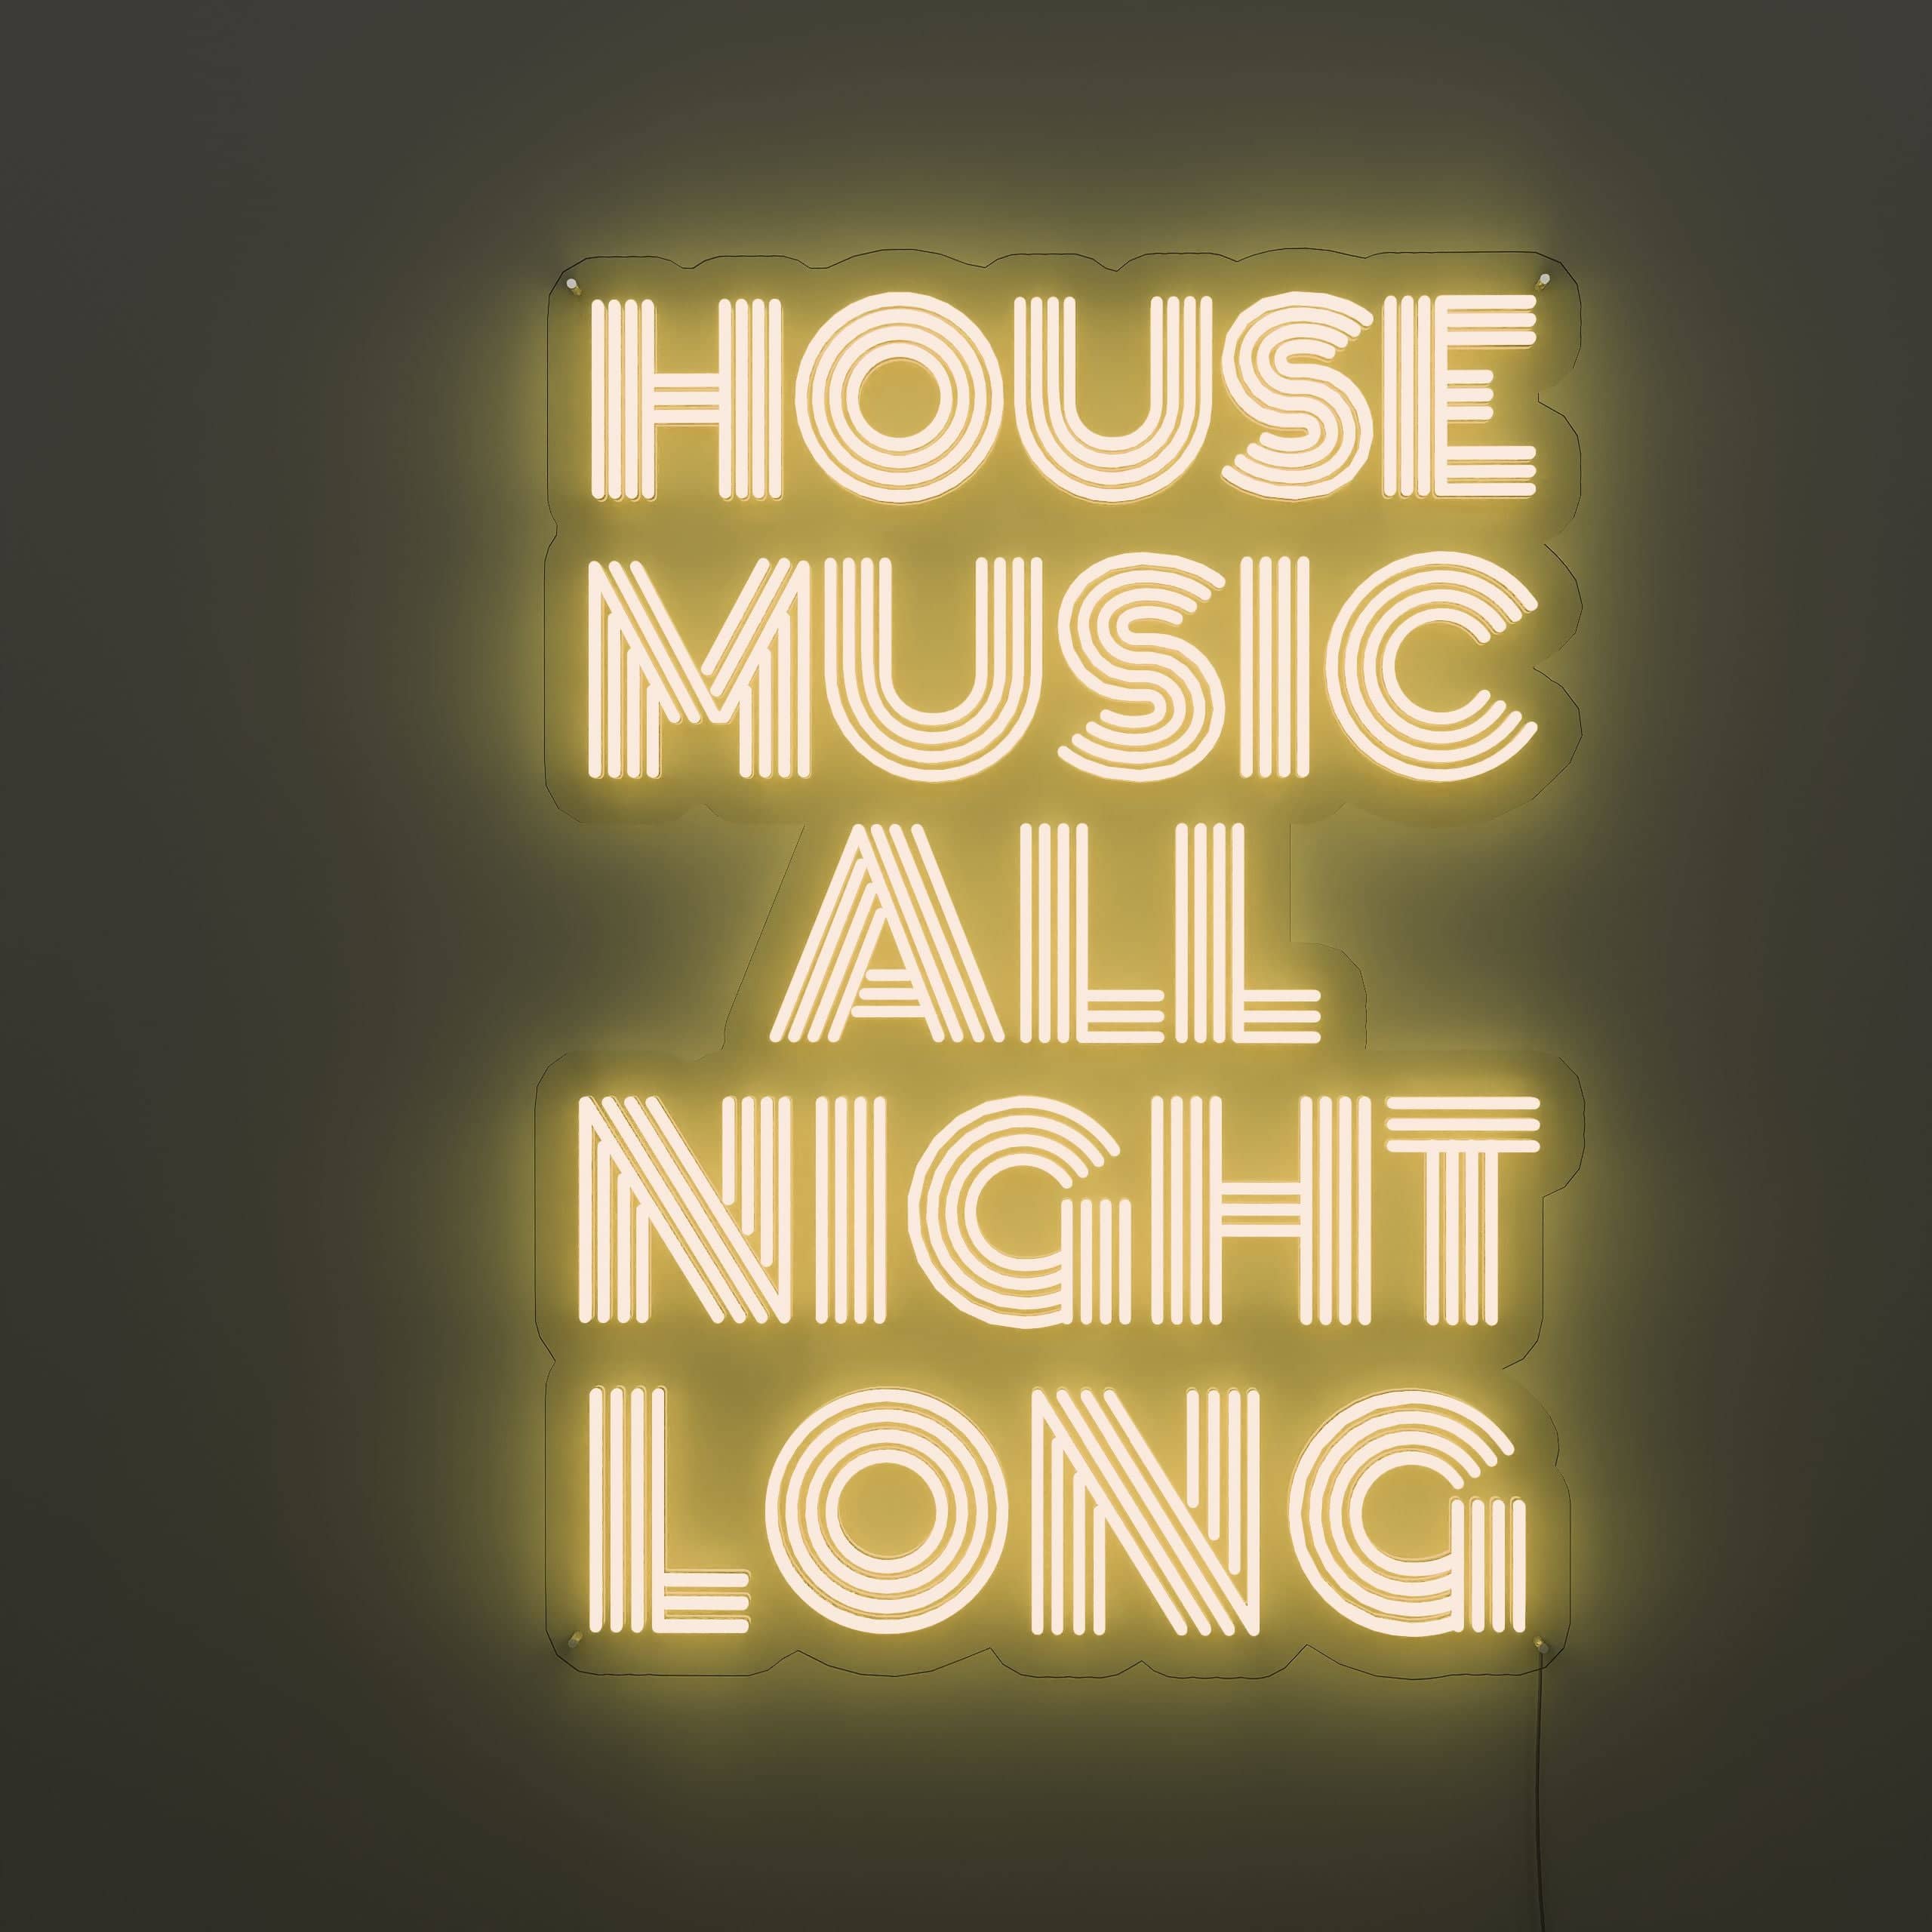 continuous-house-music-neon-sign-lite